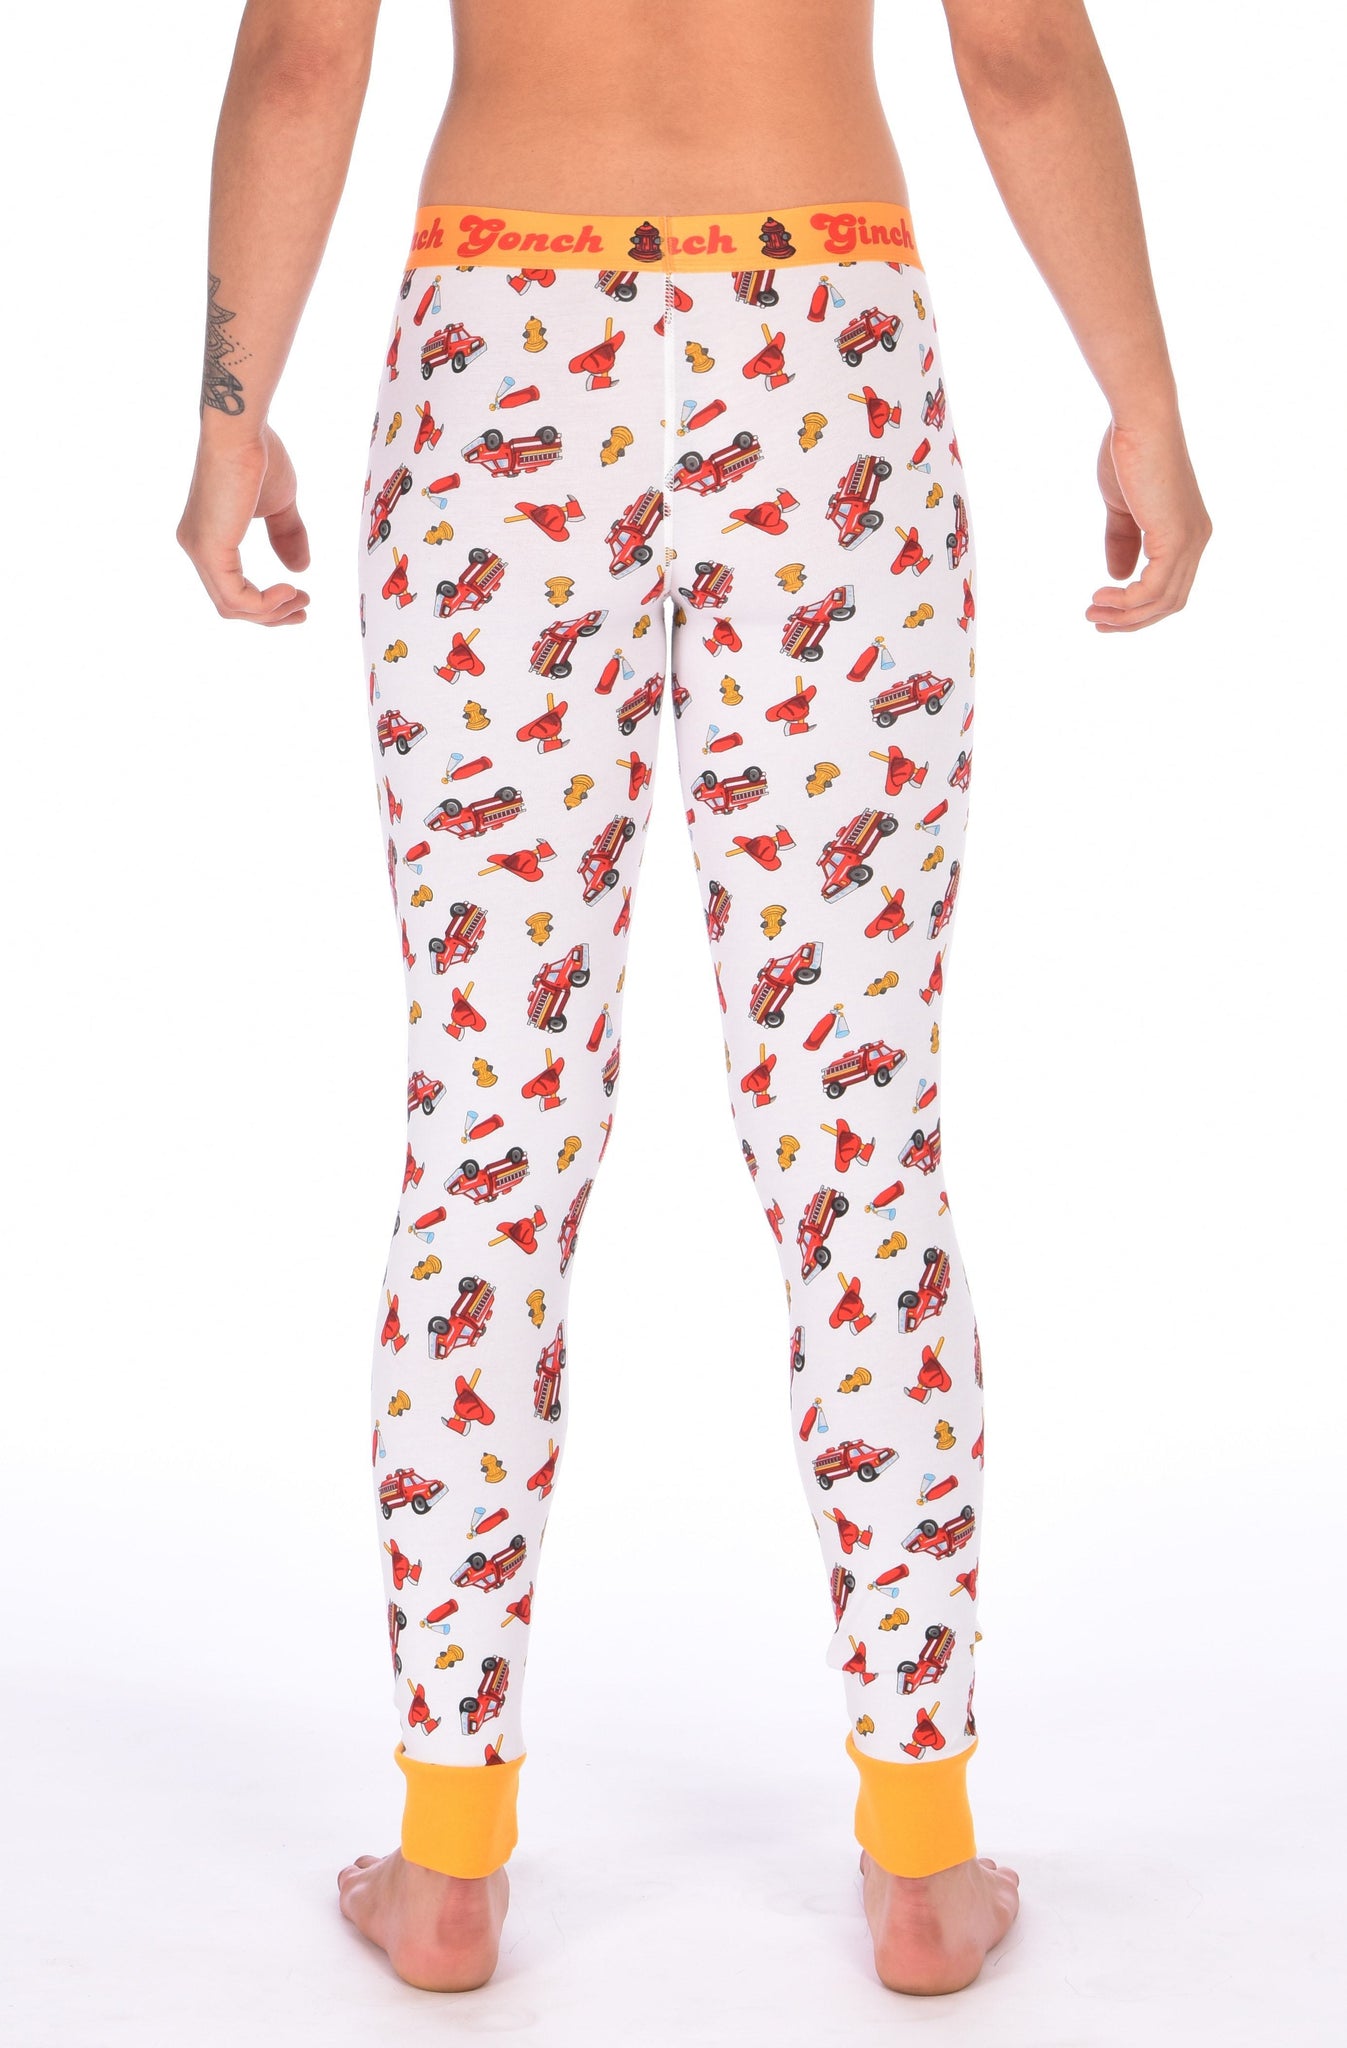 Ginch Gonch GG Fire Fighters long johns leggings women's underwear y front white fabric with fire engines hats and hydrants, yellow trim and yellow printed waistband back